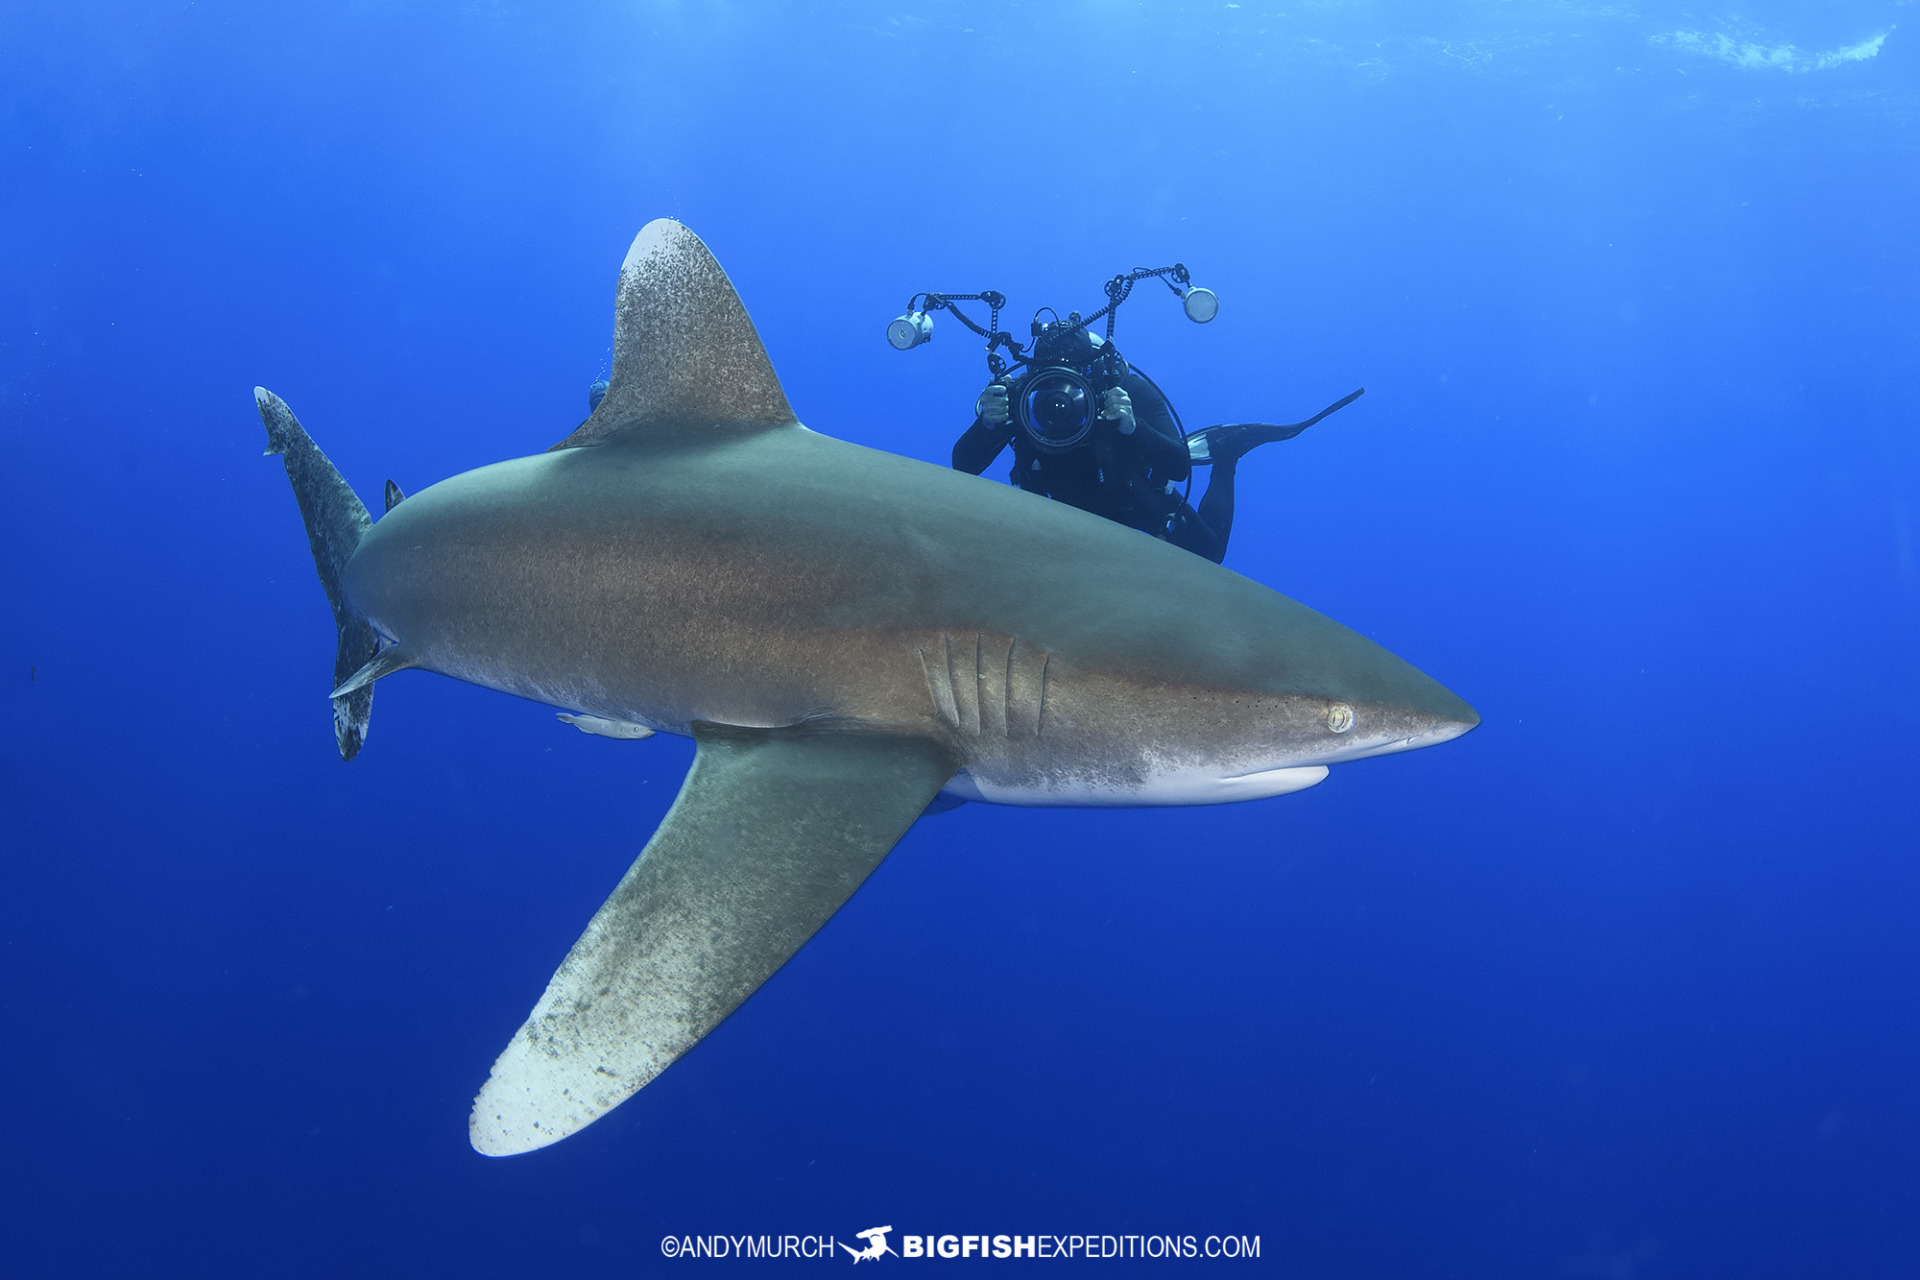 Diving with oceanic whitetip sharks